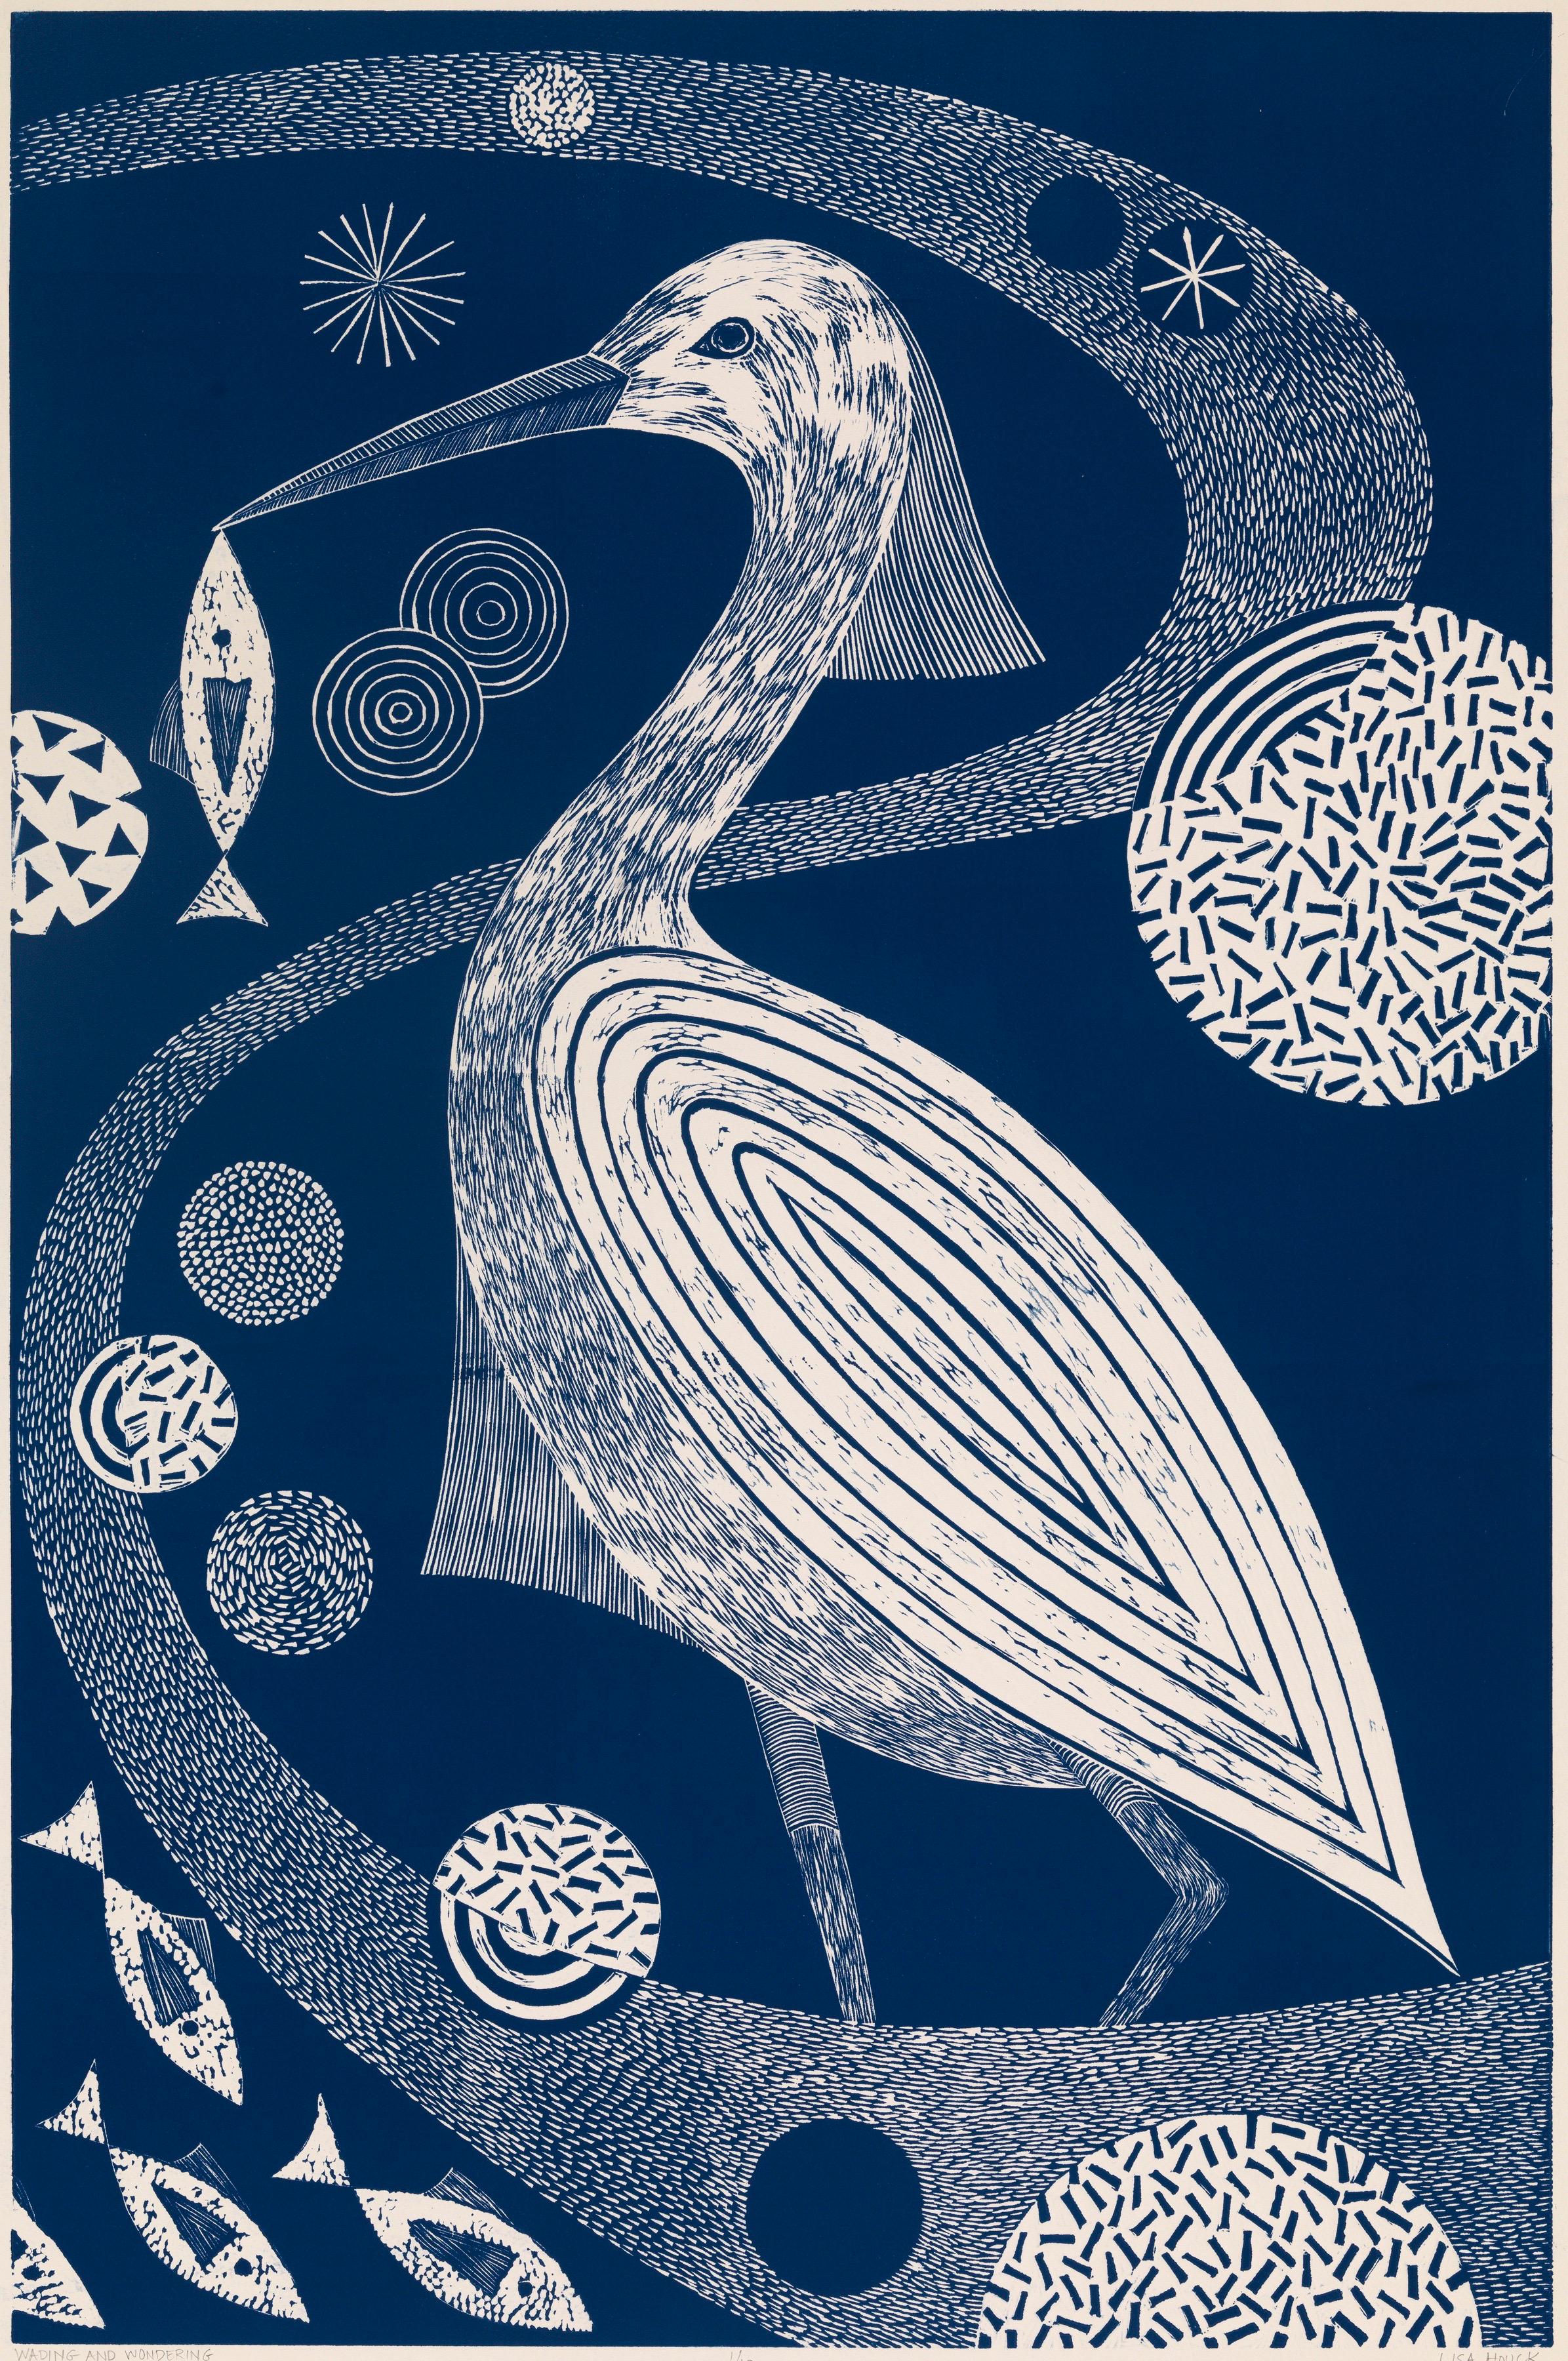 'Dipping and Diving'  Linoleum Block Print, Edition 10,  35 1/4 x 23 1/4 Inches, is one of a series of 8 related prints in this size in varying shades of blue.   Sold individually or as sets of 2, 3, 4, 5, 6, 7 or 8. 

There is also a separate